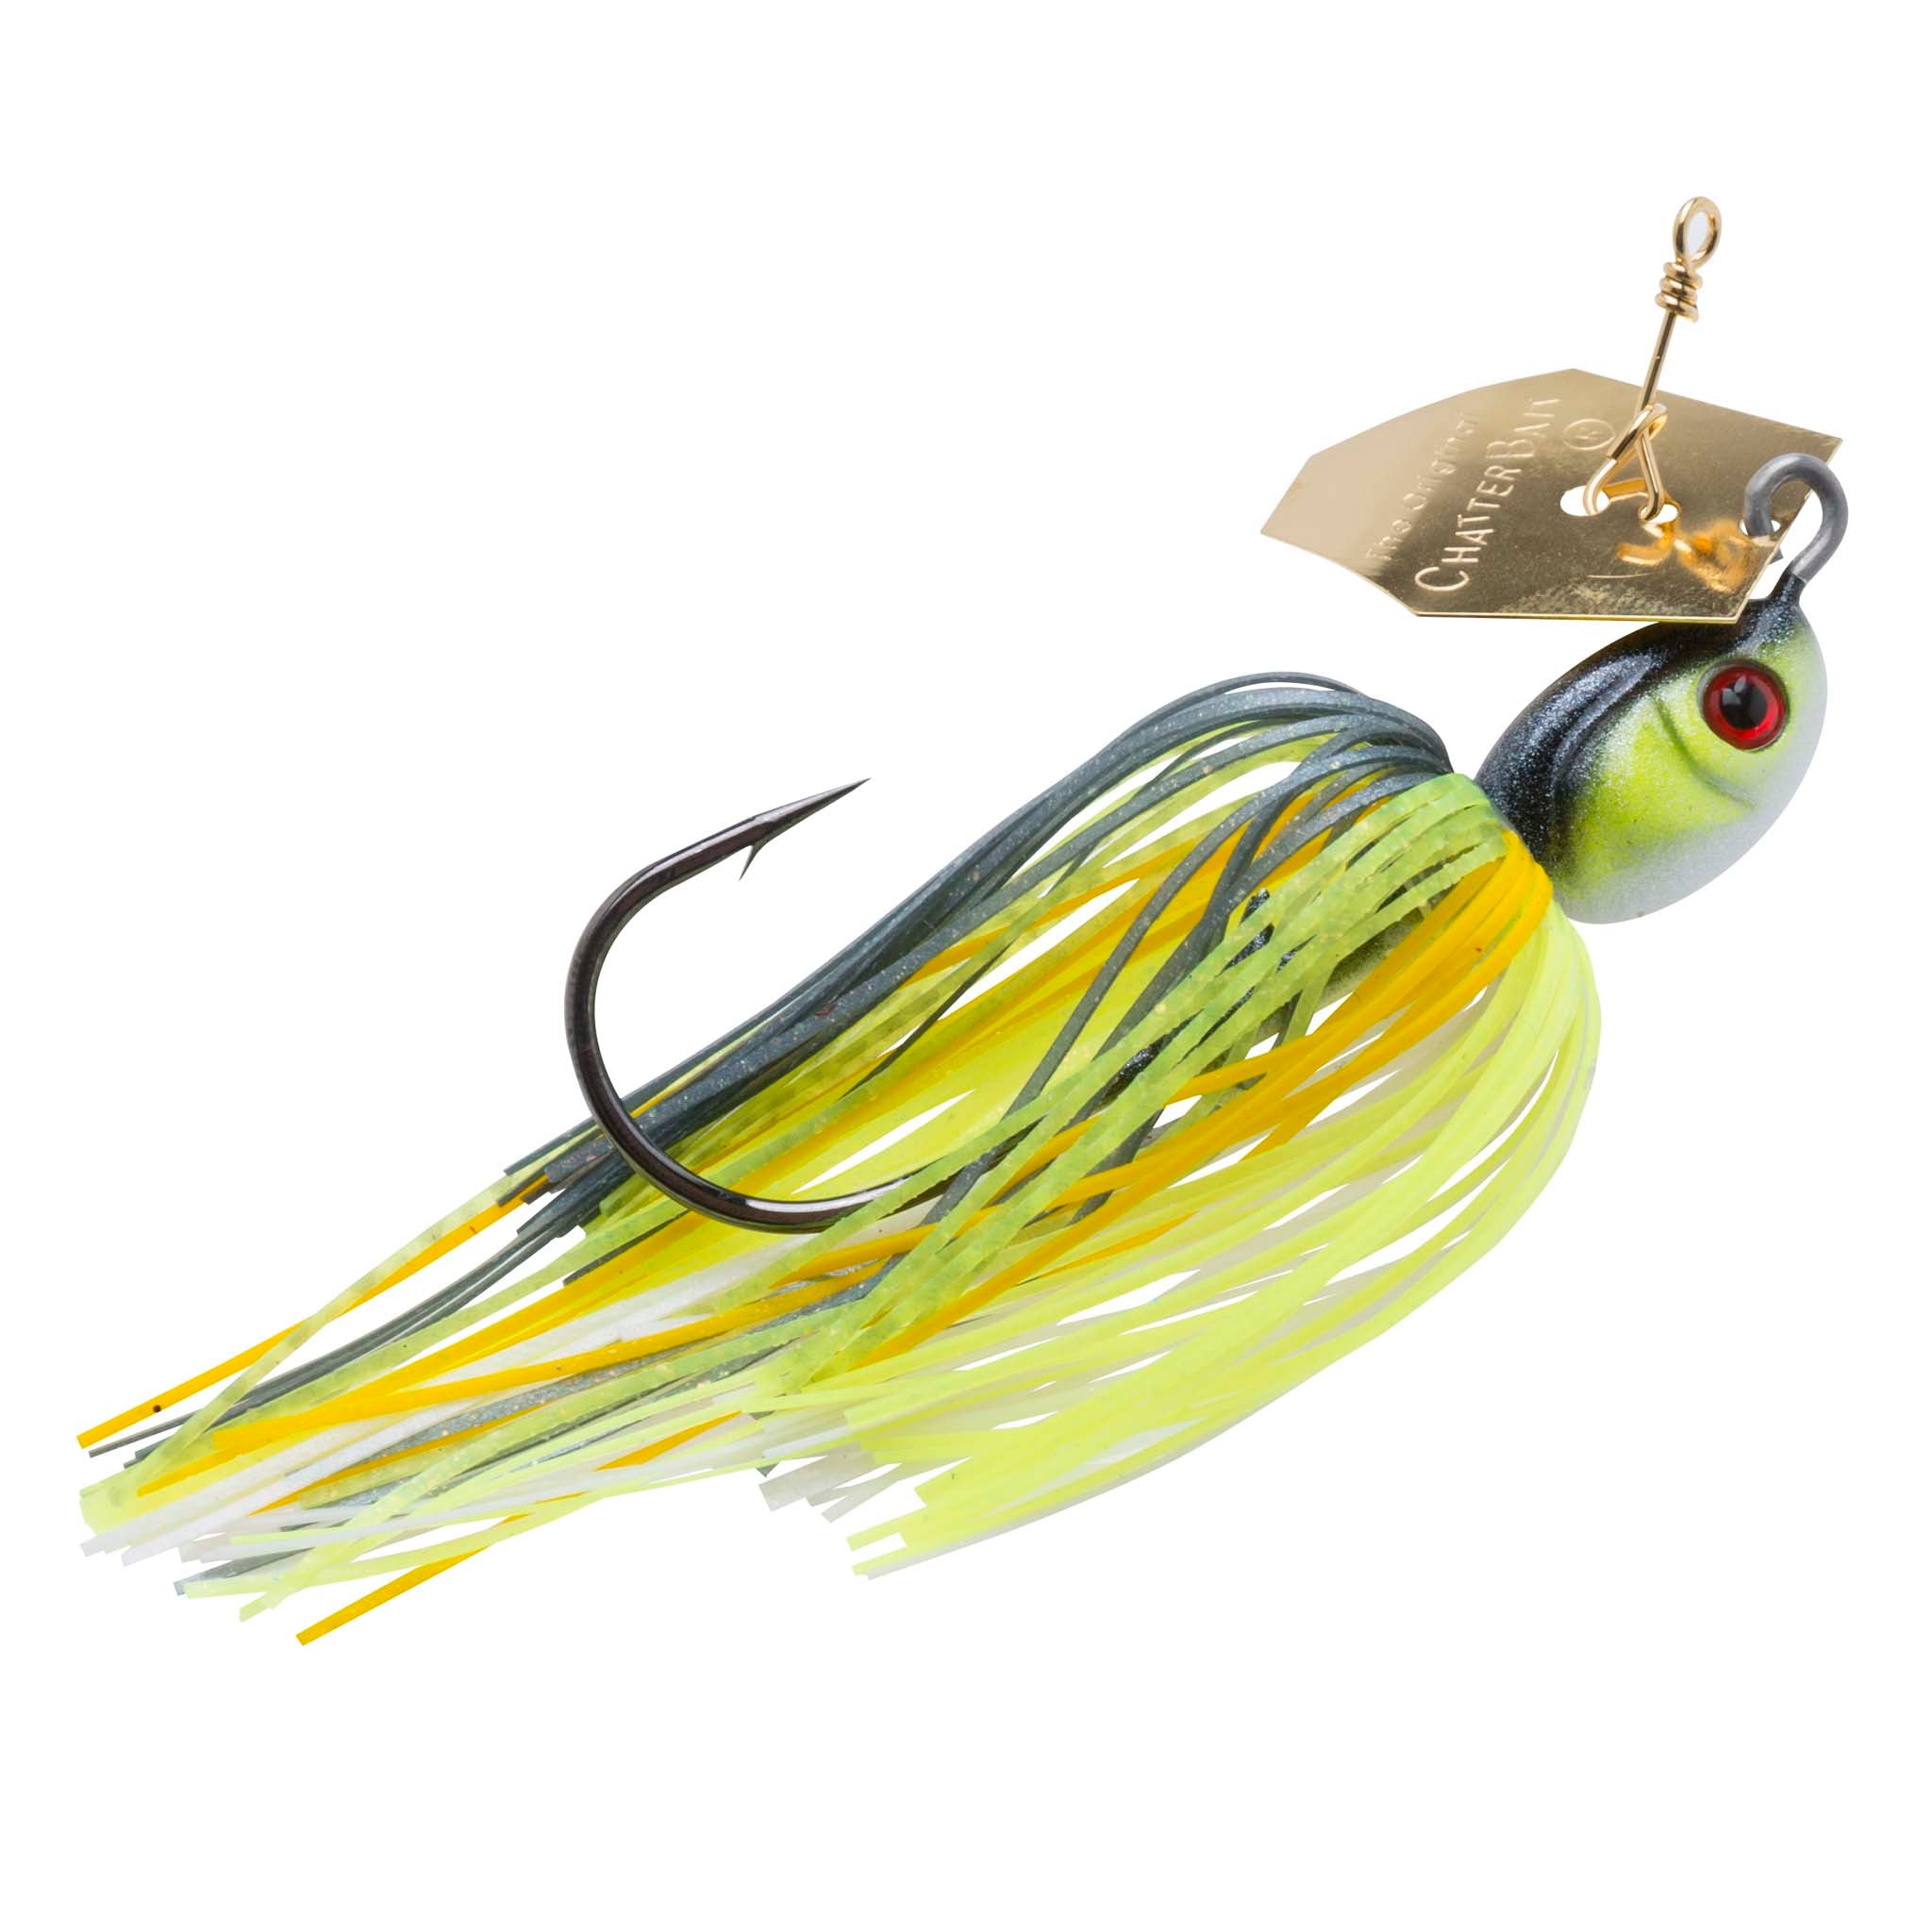 Z-man ChatterBait Projectz Lures 1 oz Weight, 6/0 Hook, Green